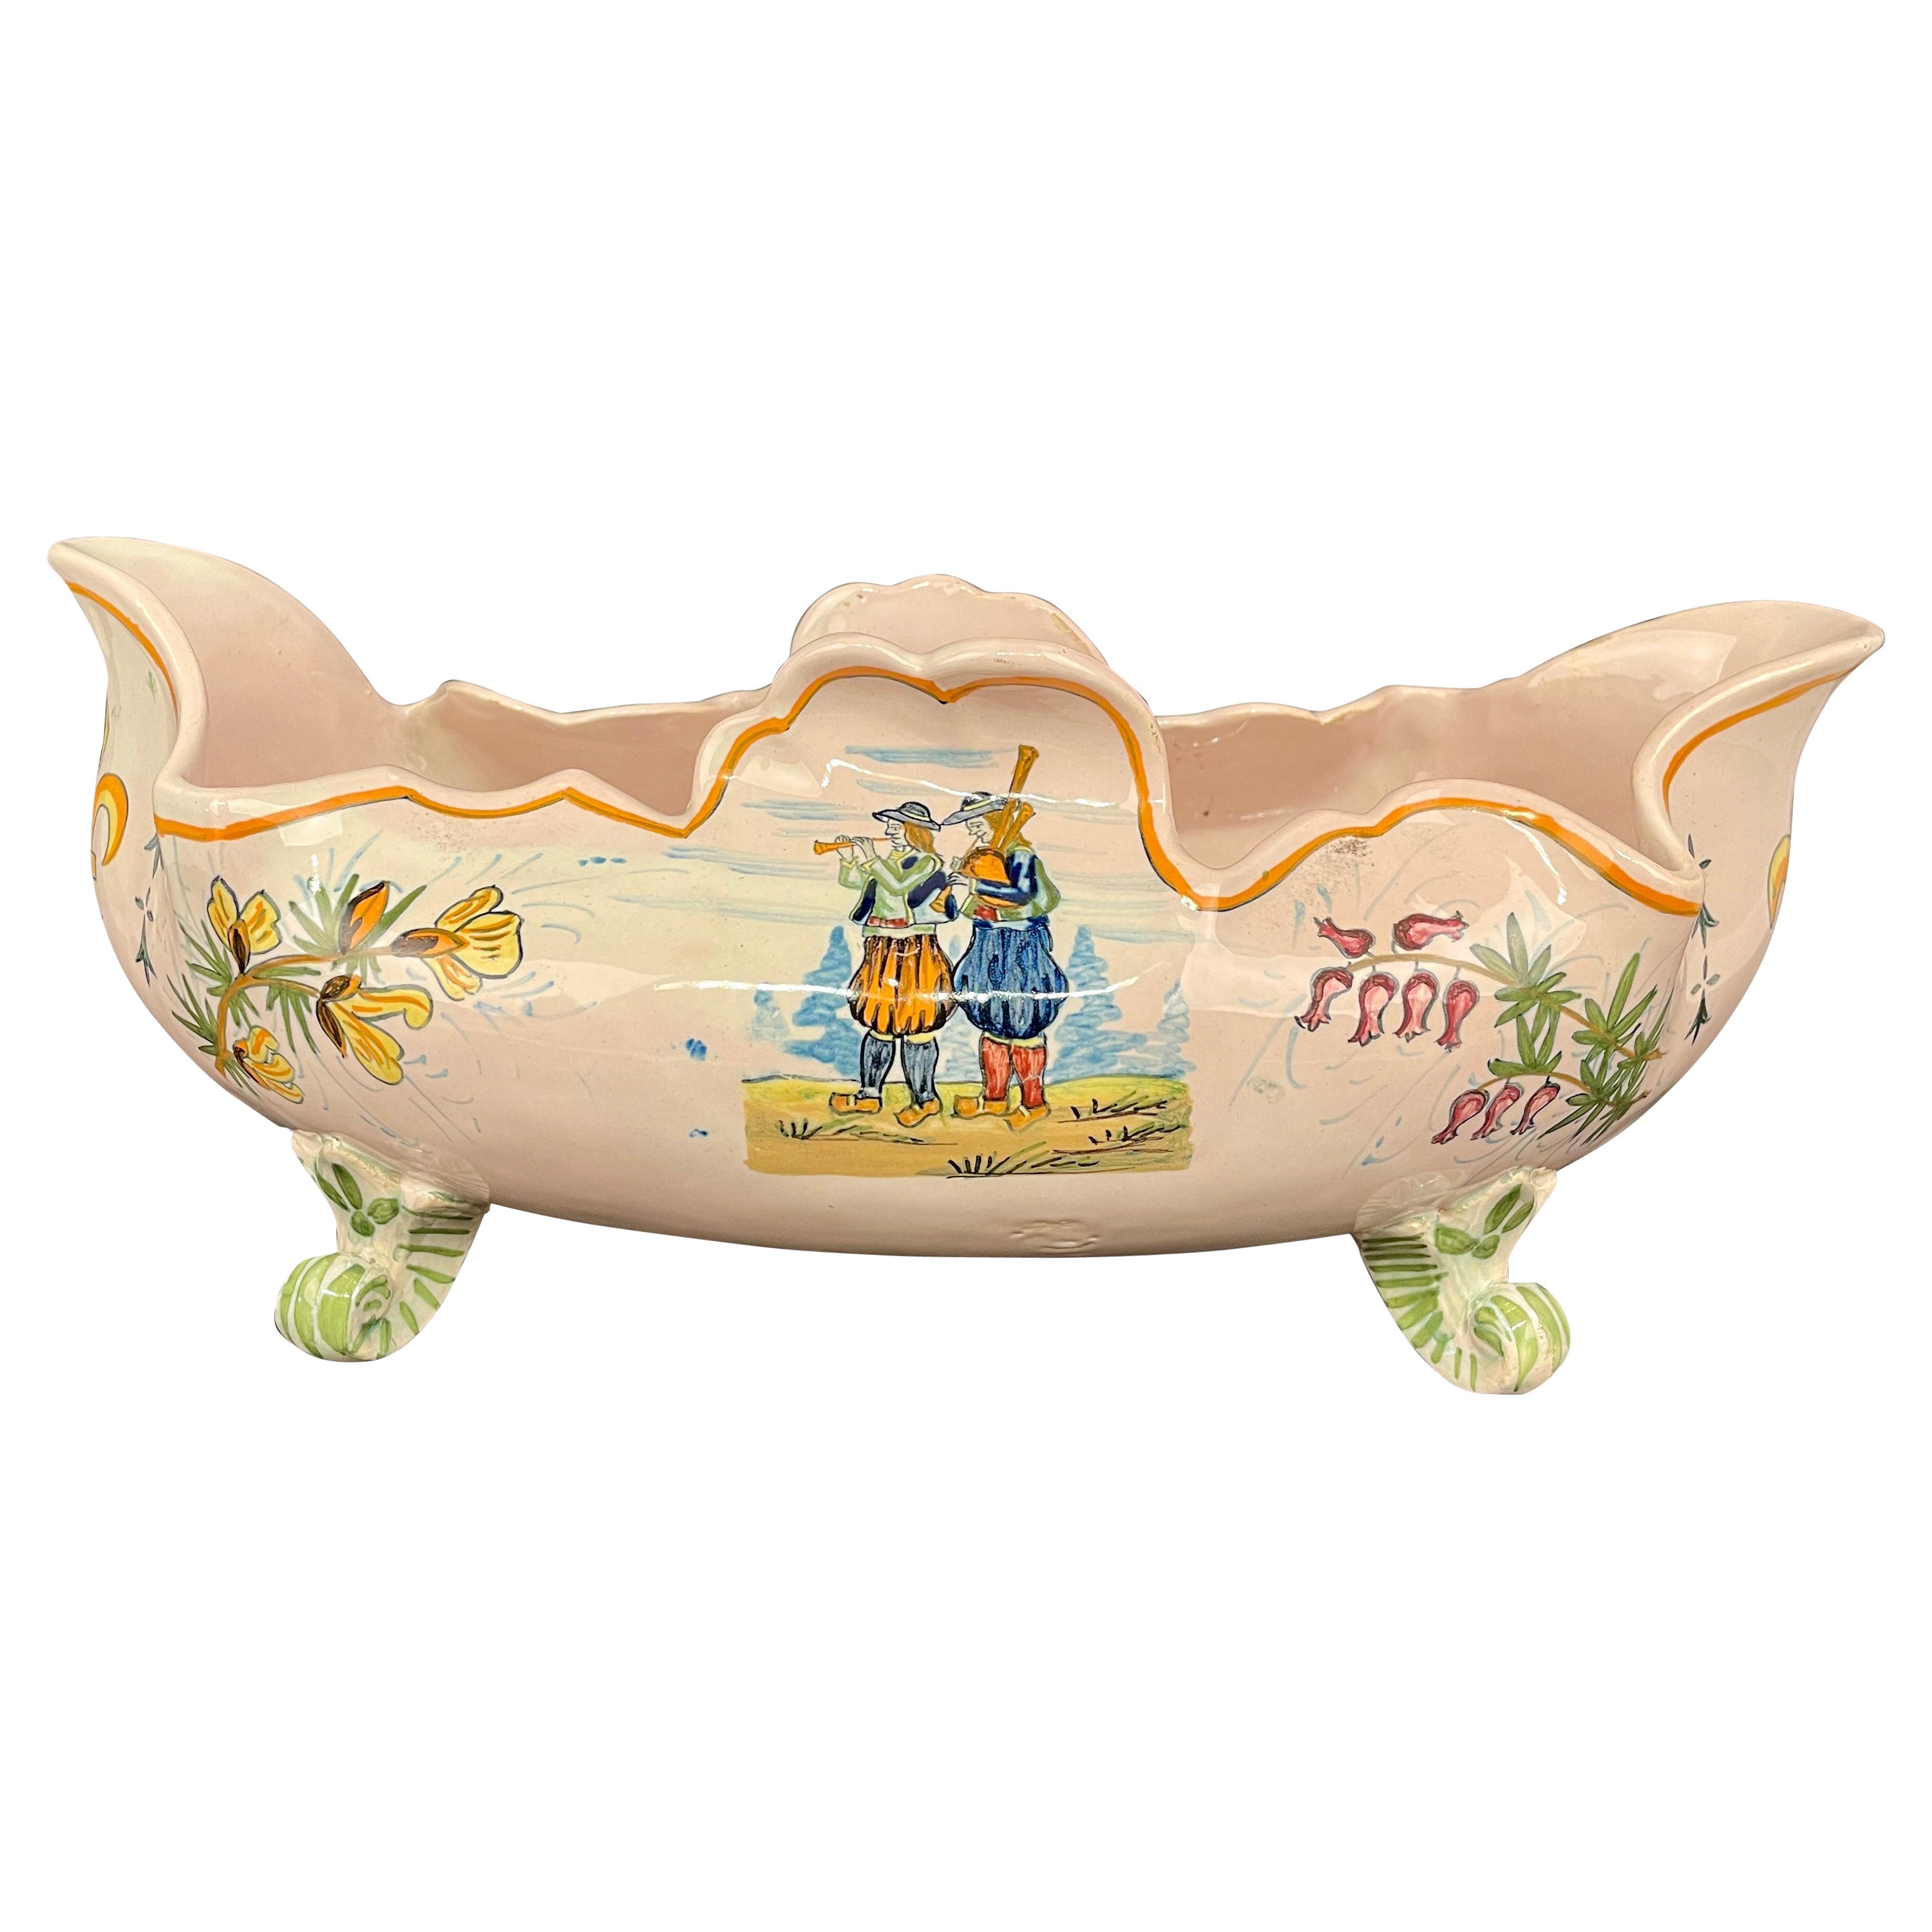 Henriot Quimper Faience Footed Jardiniere